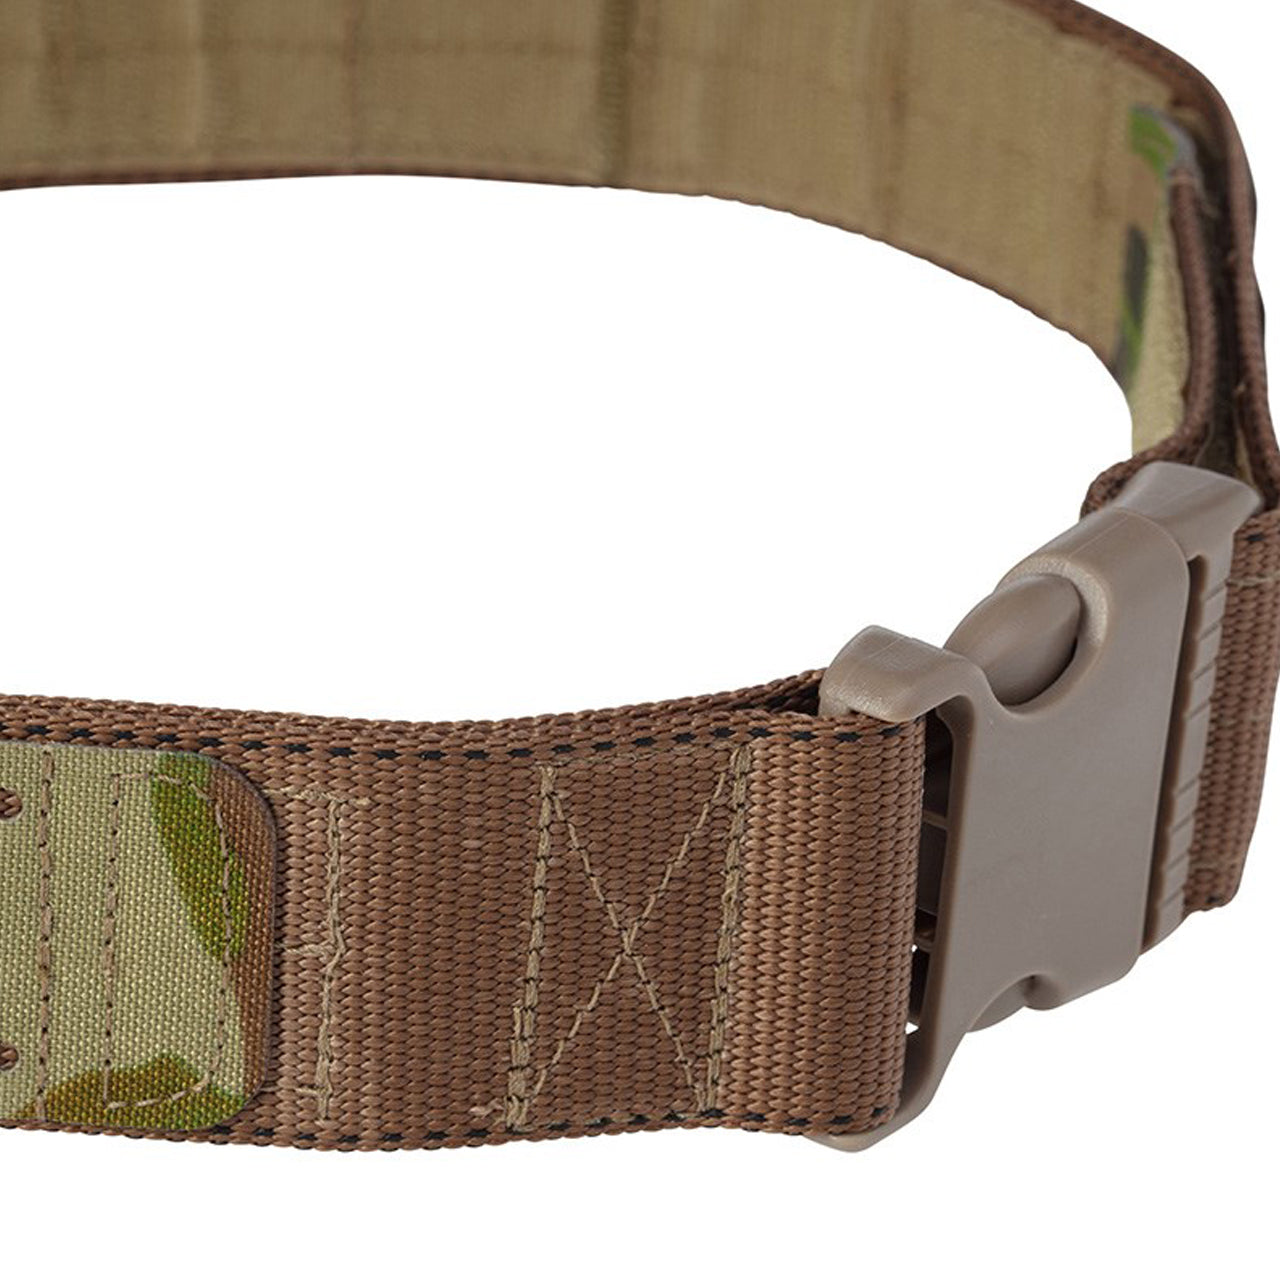 Designed for close-quarter operations, this robust Low Profile Operator Belt is designed to keep up with the toughest missions. Crafted from highly durable 38mm TY13 resin-coated webbing, the belt features a Mil-Spec 45mm side release buckle and is available in various sizes. www.moralepatches.com.au